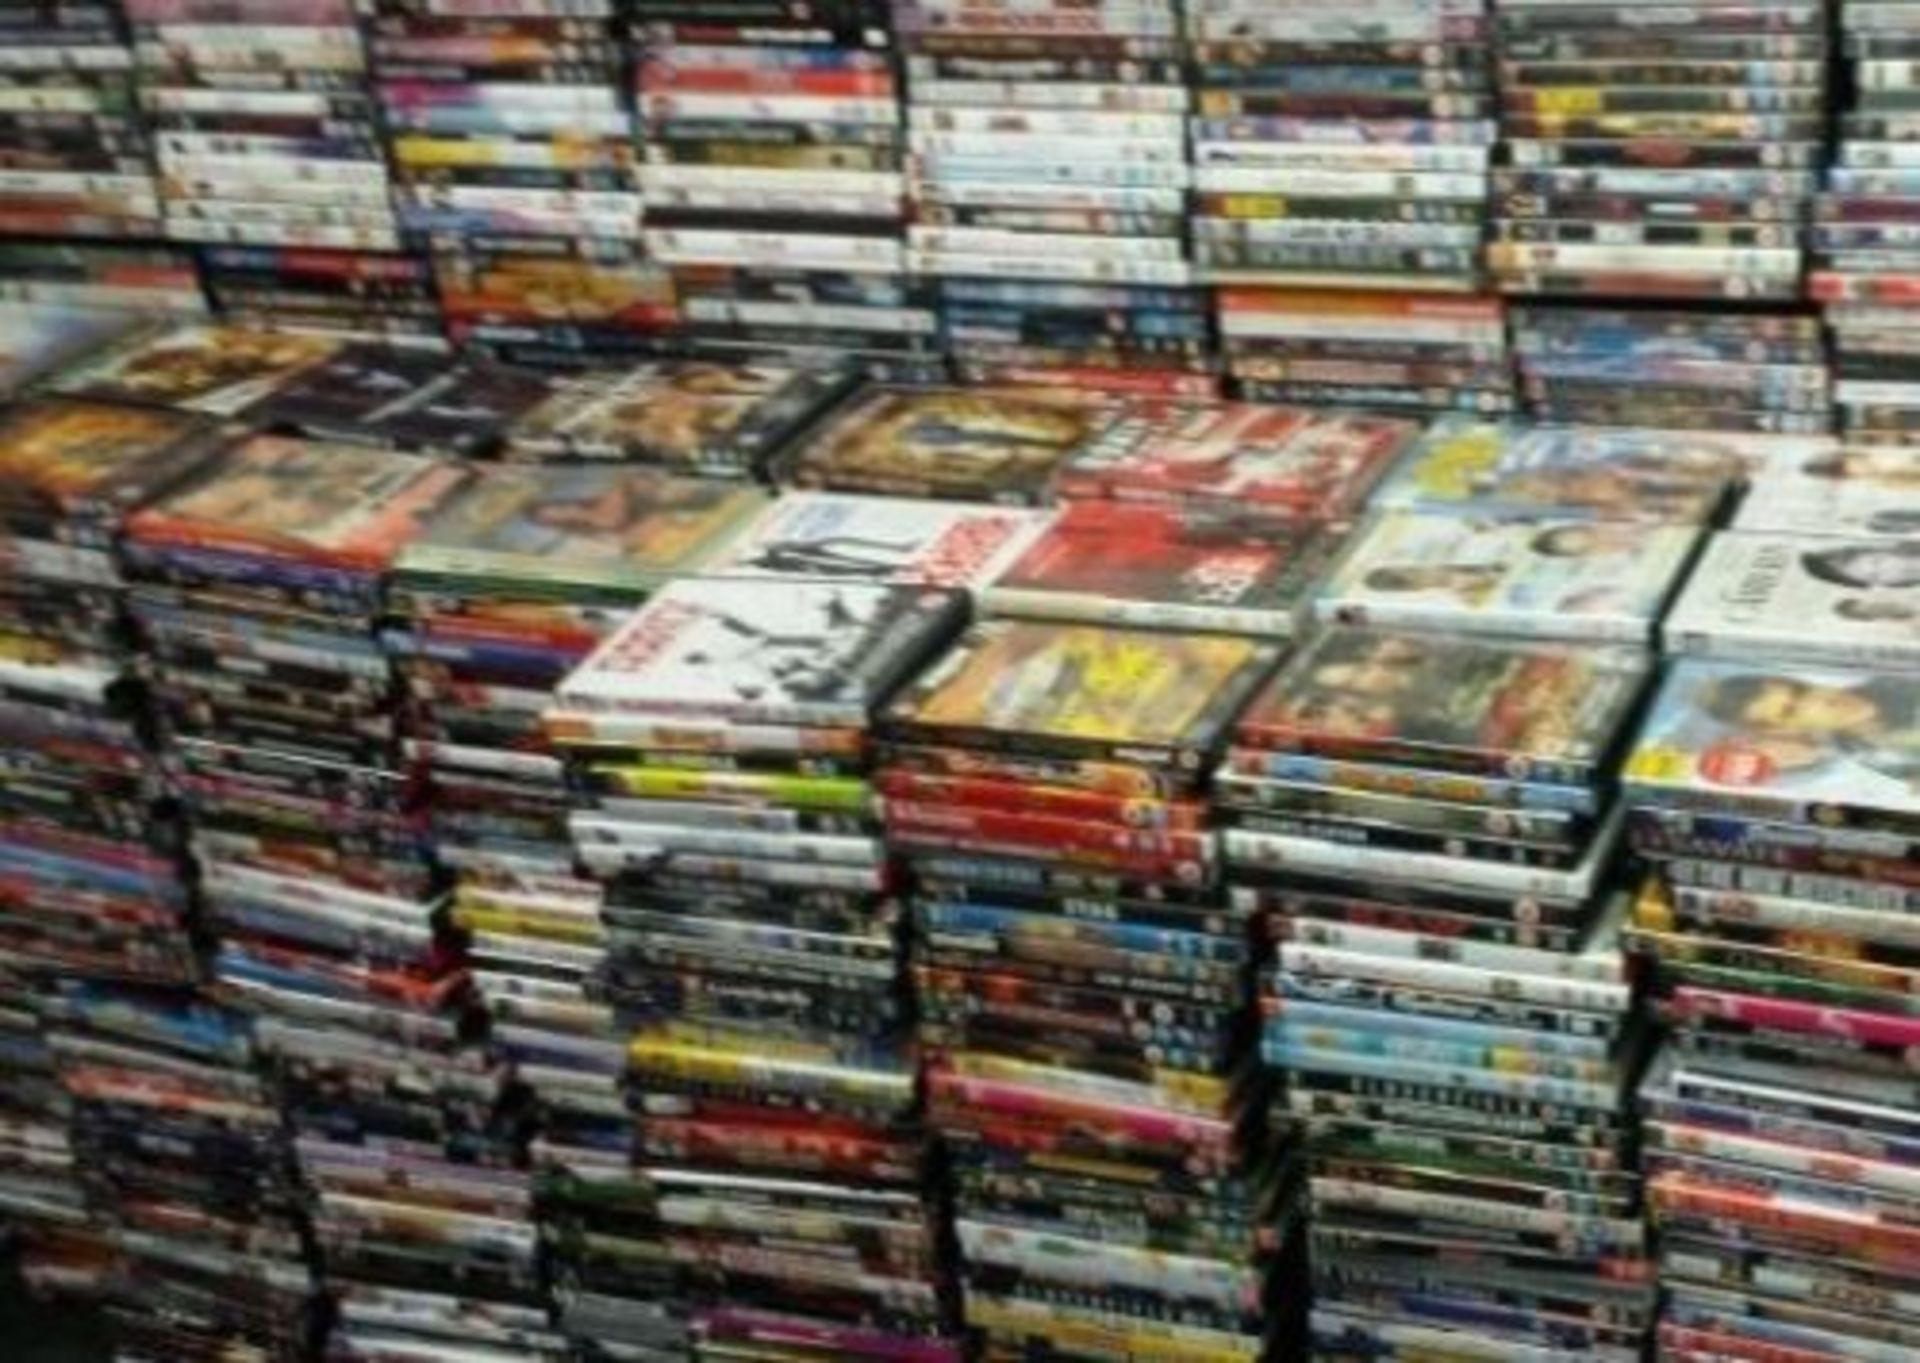 JOB LOT OF 100 x VARIOUS DVD'S - REGION 2 - USED - GOOD ASSORTMENT OF TITLES - NO RESERVE - Image 2 of 5